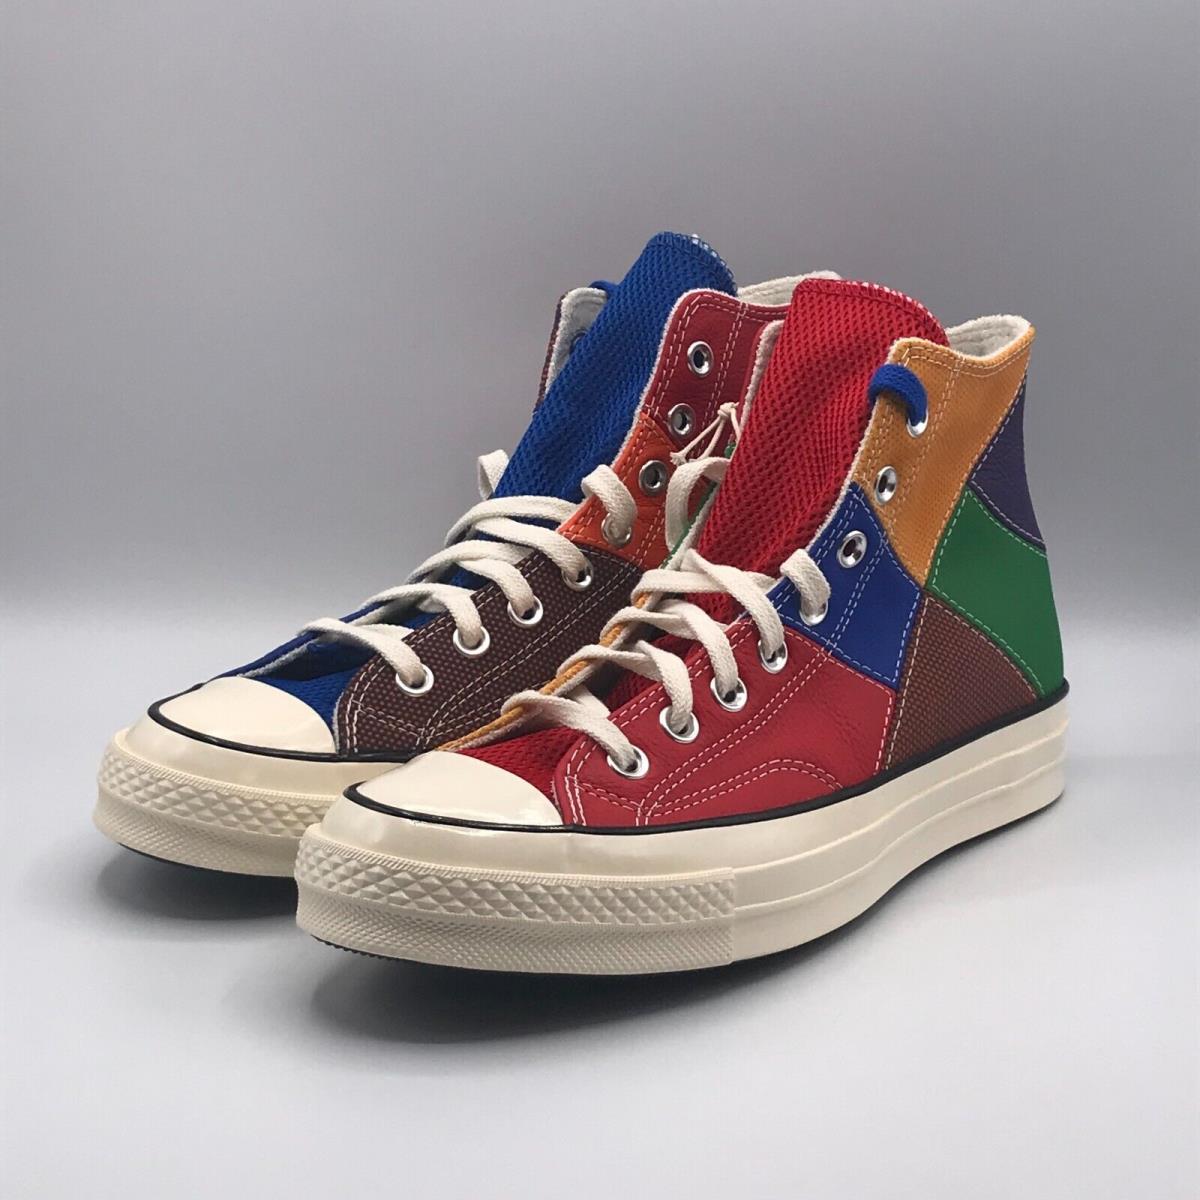 Converse Chuck 70 High Nba 75th Anniversary Blue Red Mens 8.5 Shoes Sneakers